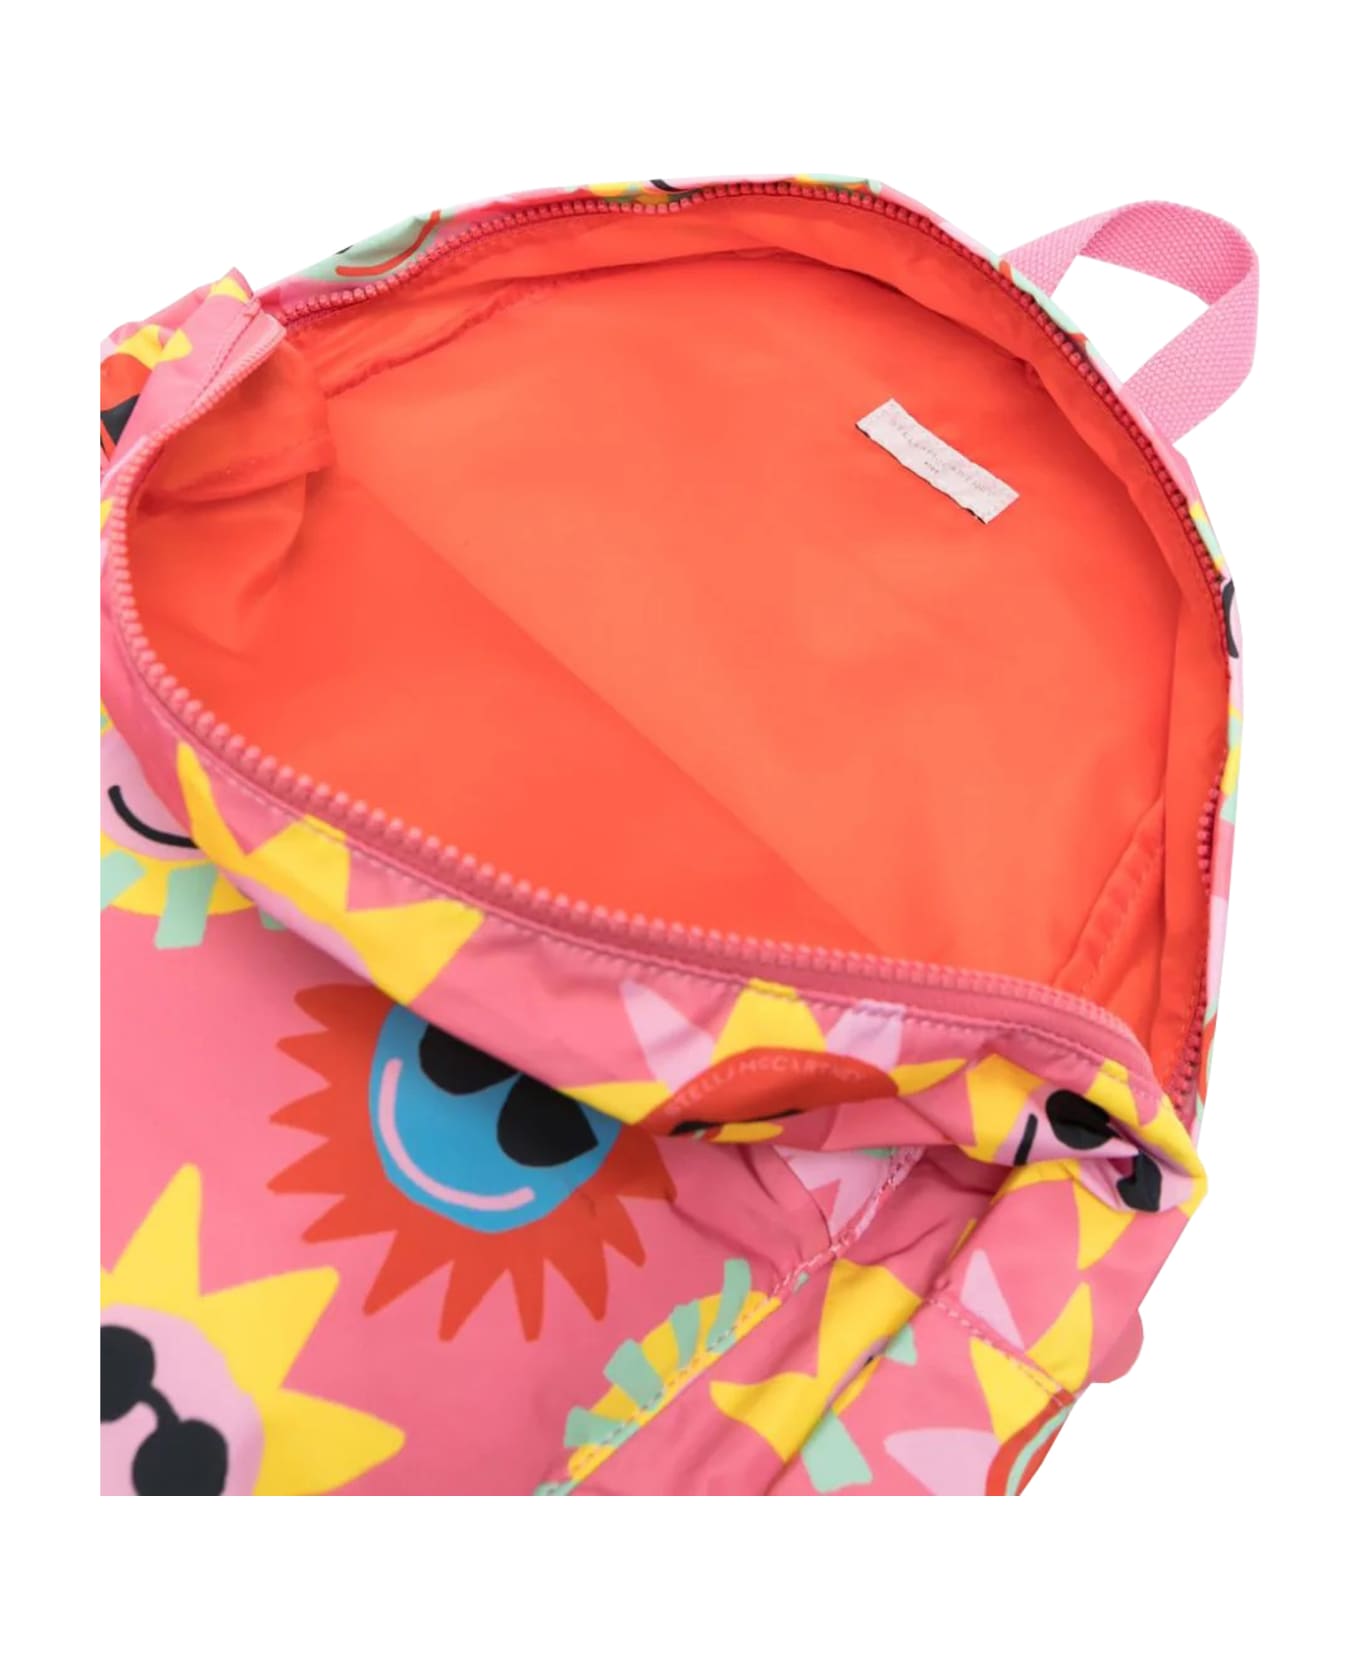 Stella McCartney Kids Backpack With Print - Multicolor